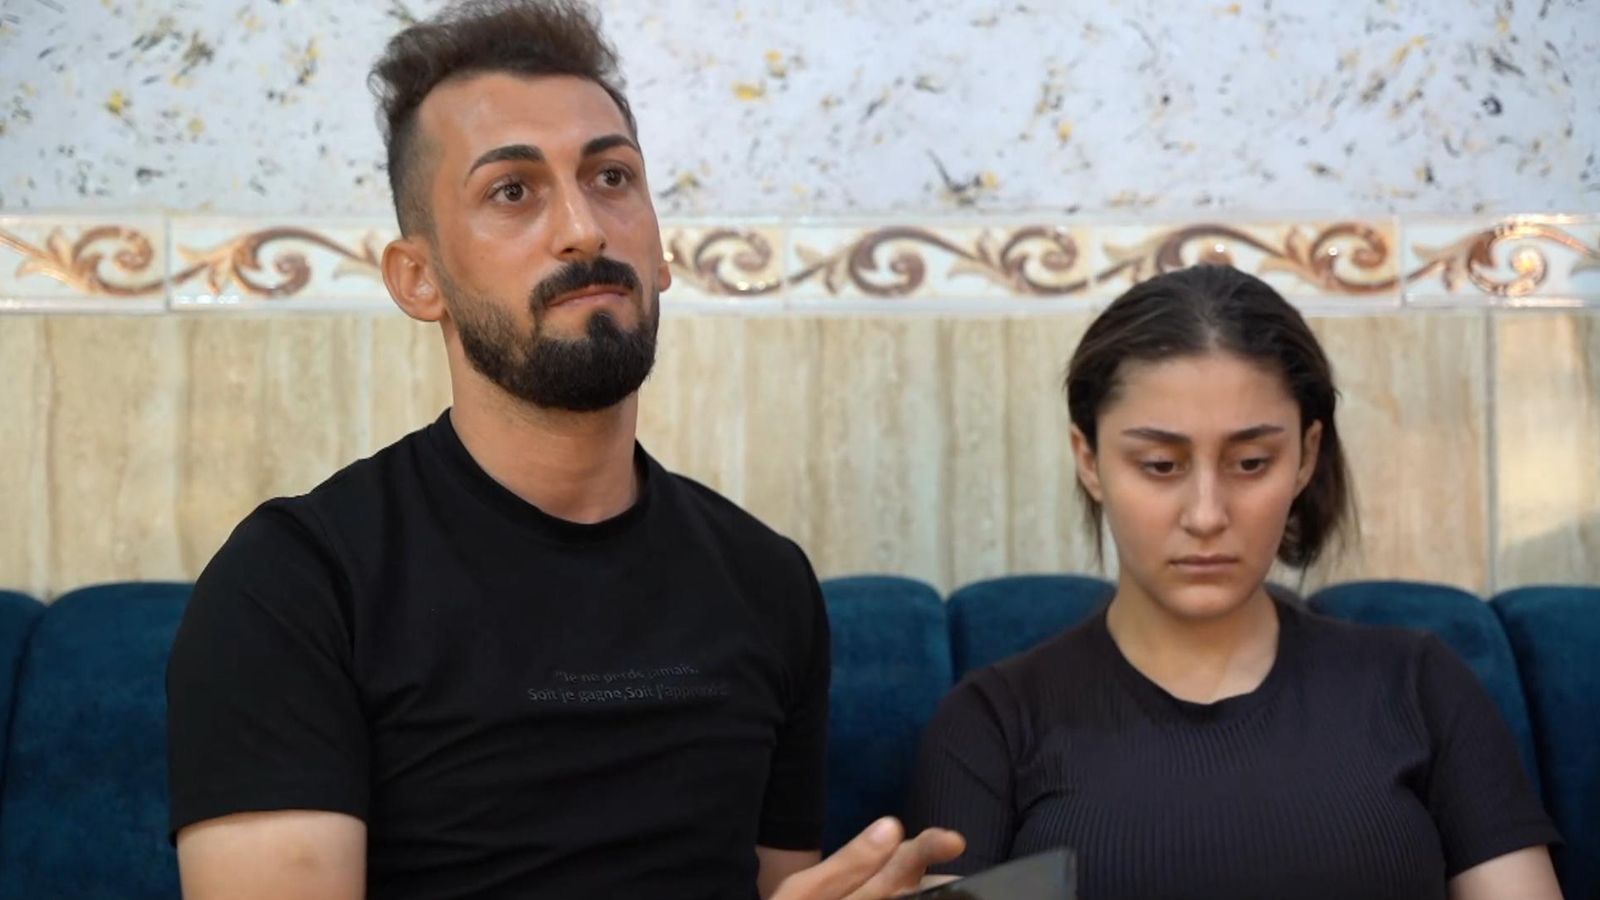 Iraq wedding fire Bride and groom can't live in their community after